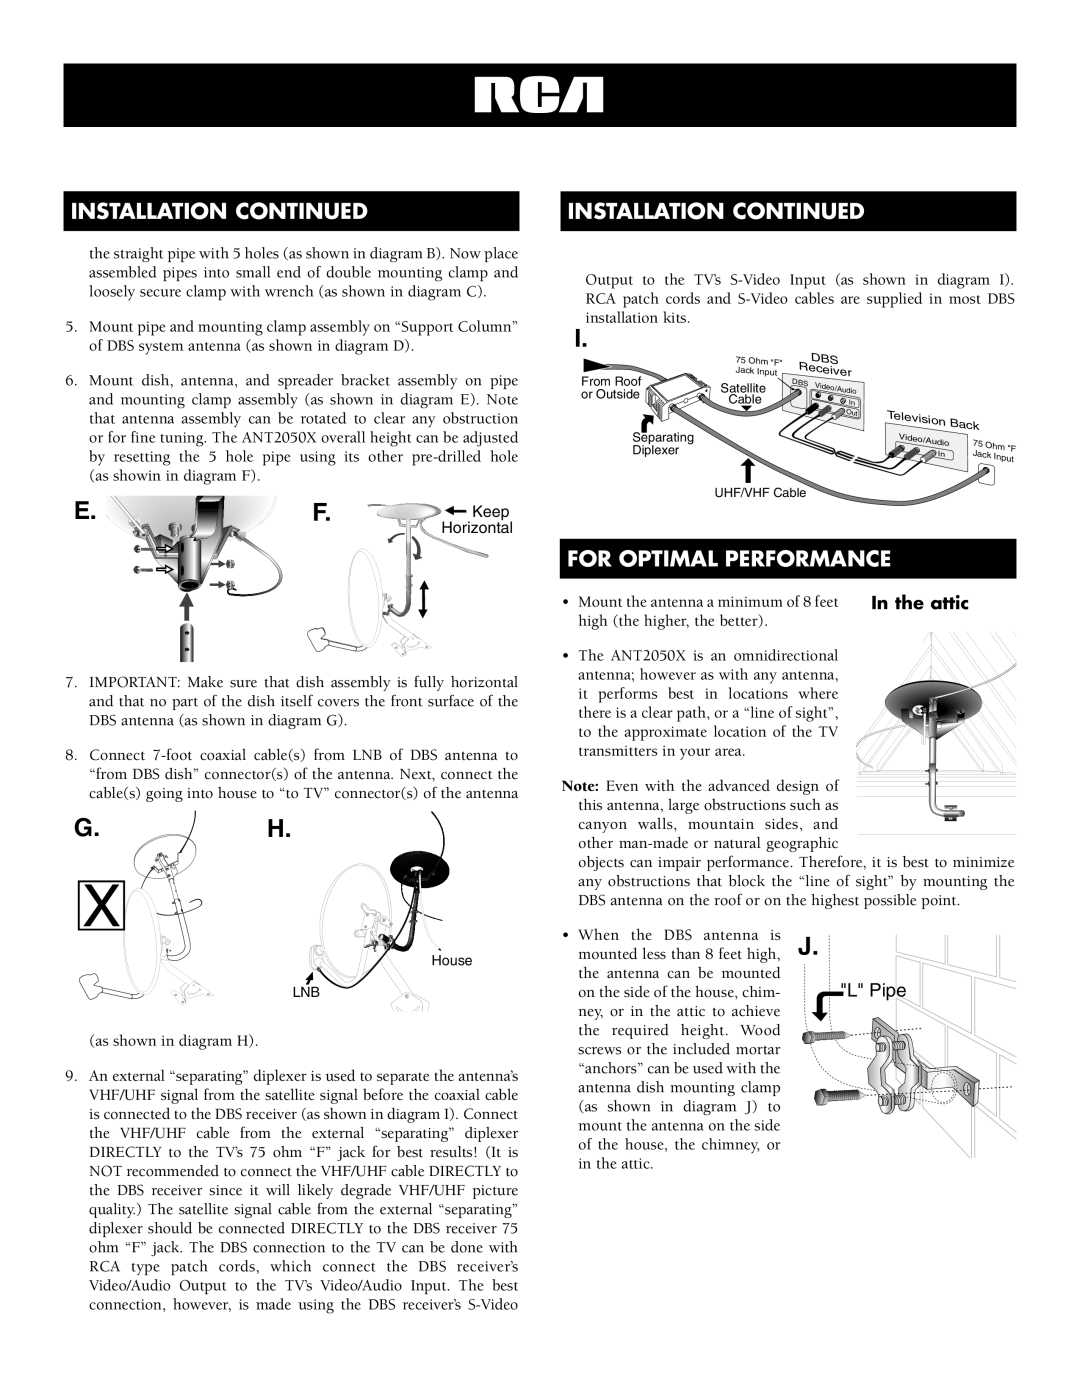 RCA ANT2050X specifications G. H, Installation Continued, For Optimal Performance, L Pipe, In the attic, Keep 